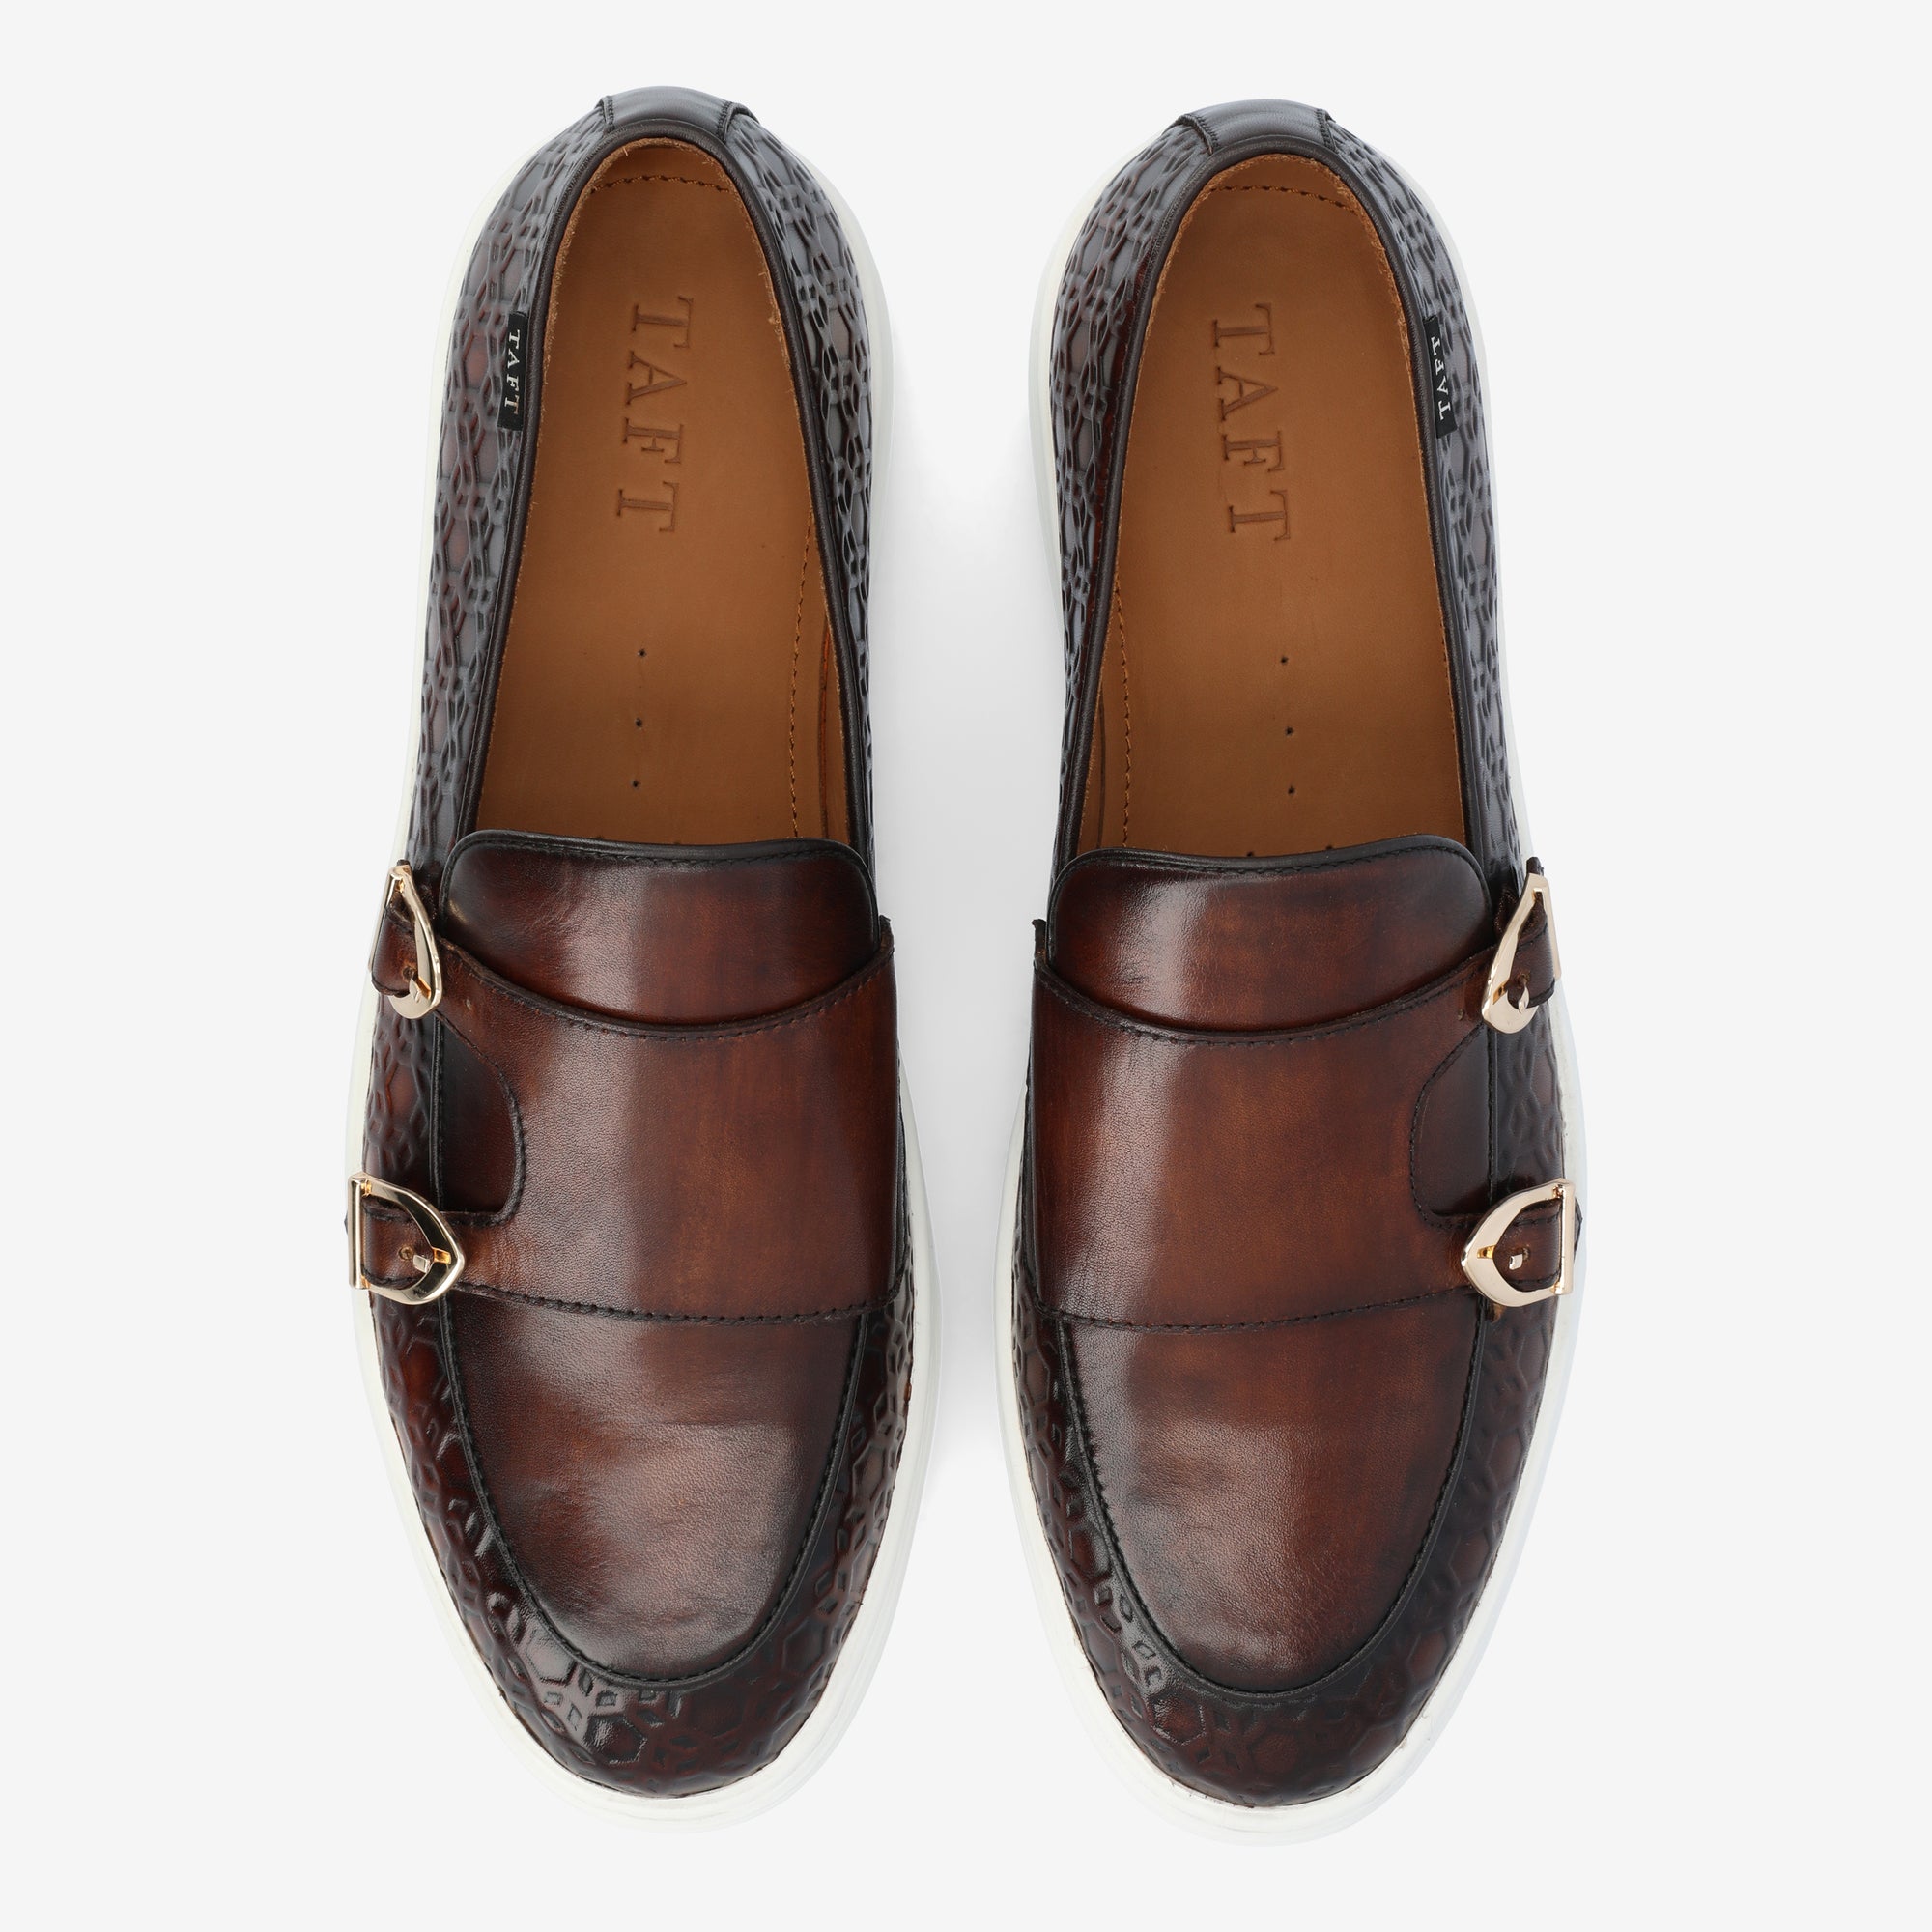 Model 107 Loafer In Chocolate